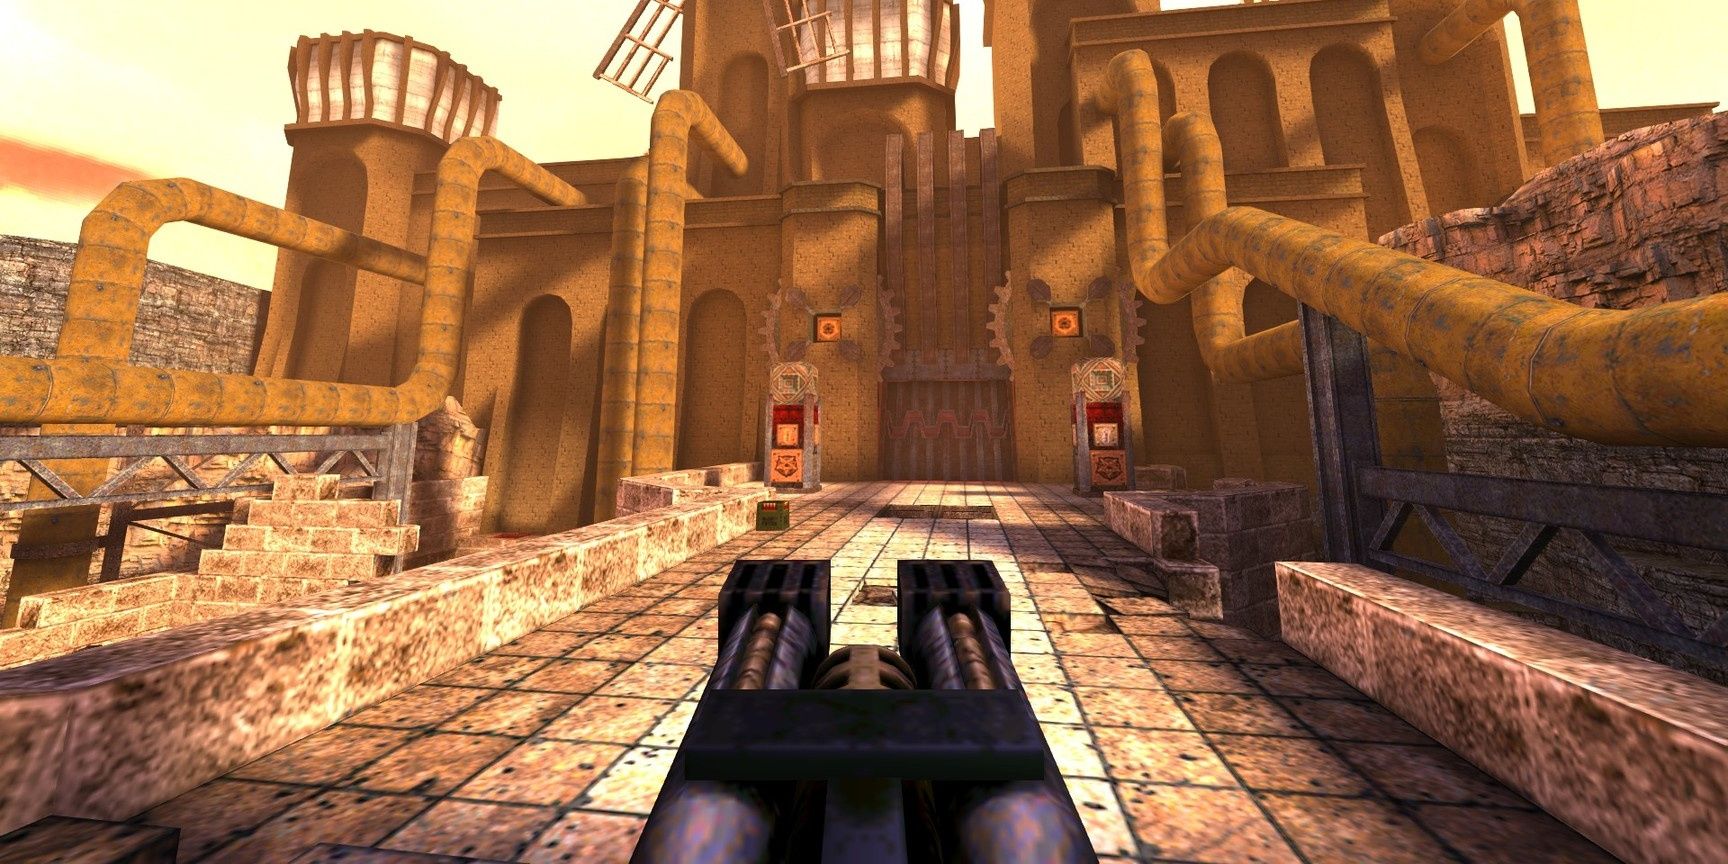 quake-2-is-proof-you-can-remaster-games-people-already-own